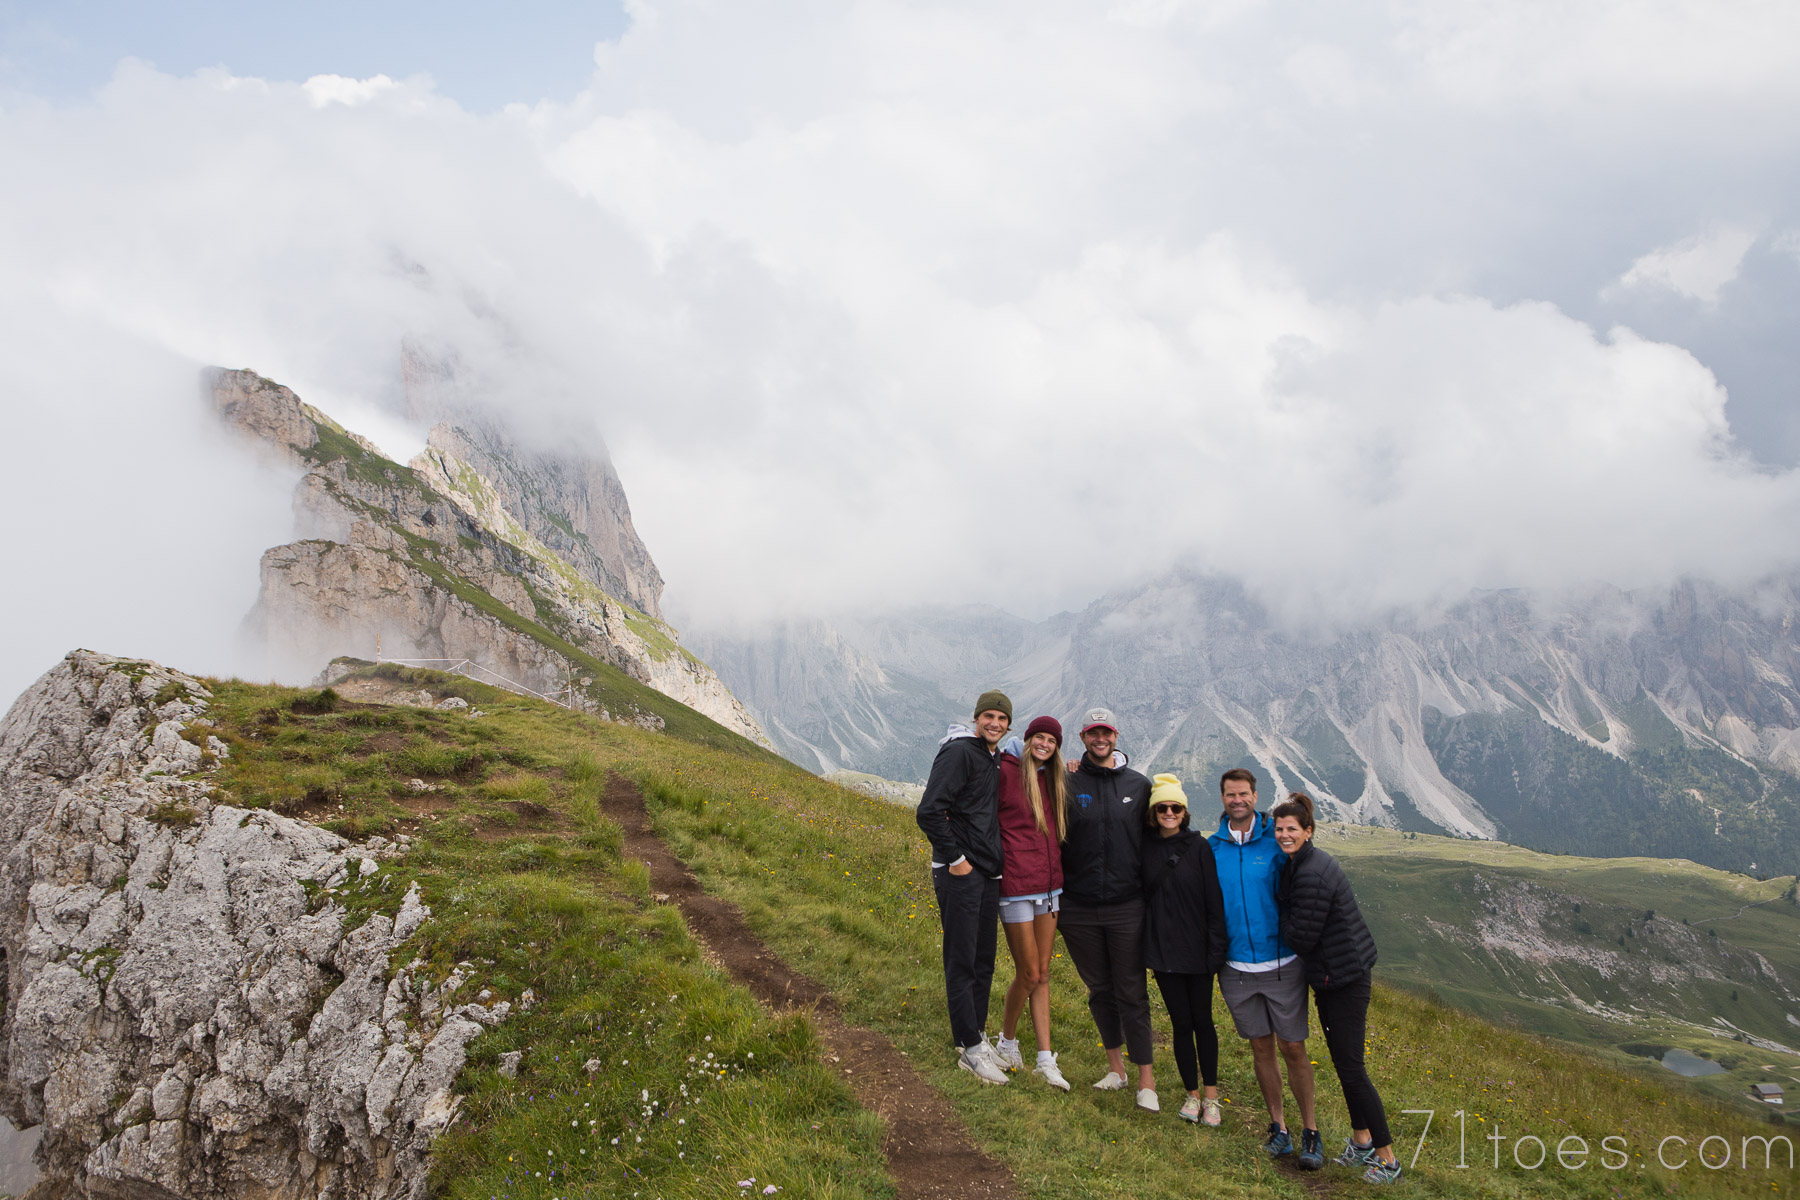 two days in the Italian Dolomites